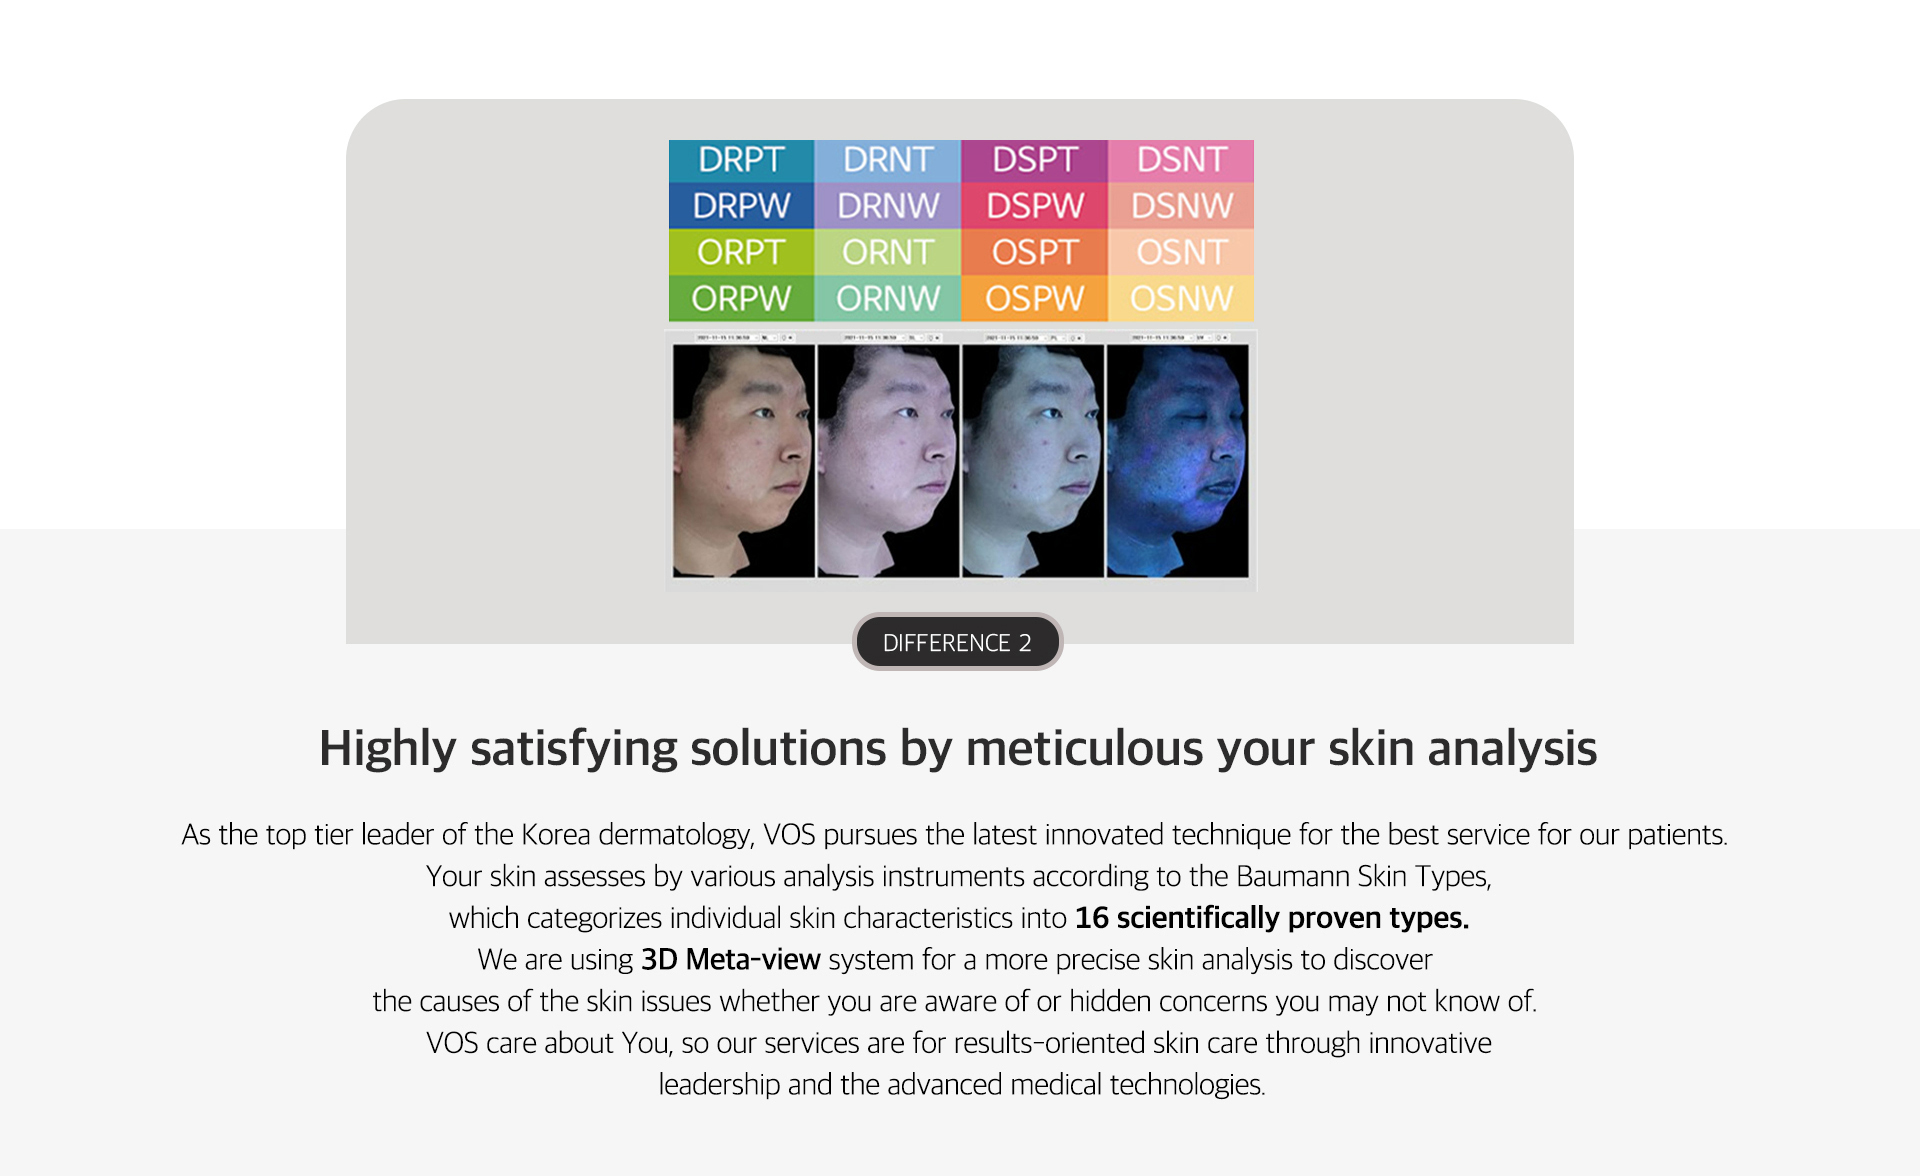 [DIFFERENCE 2] Highly satisfying solutions by meticulous your skin analysis